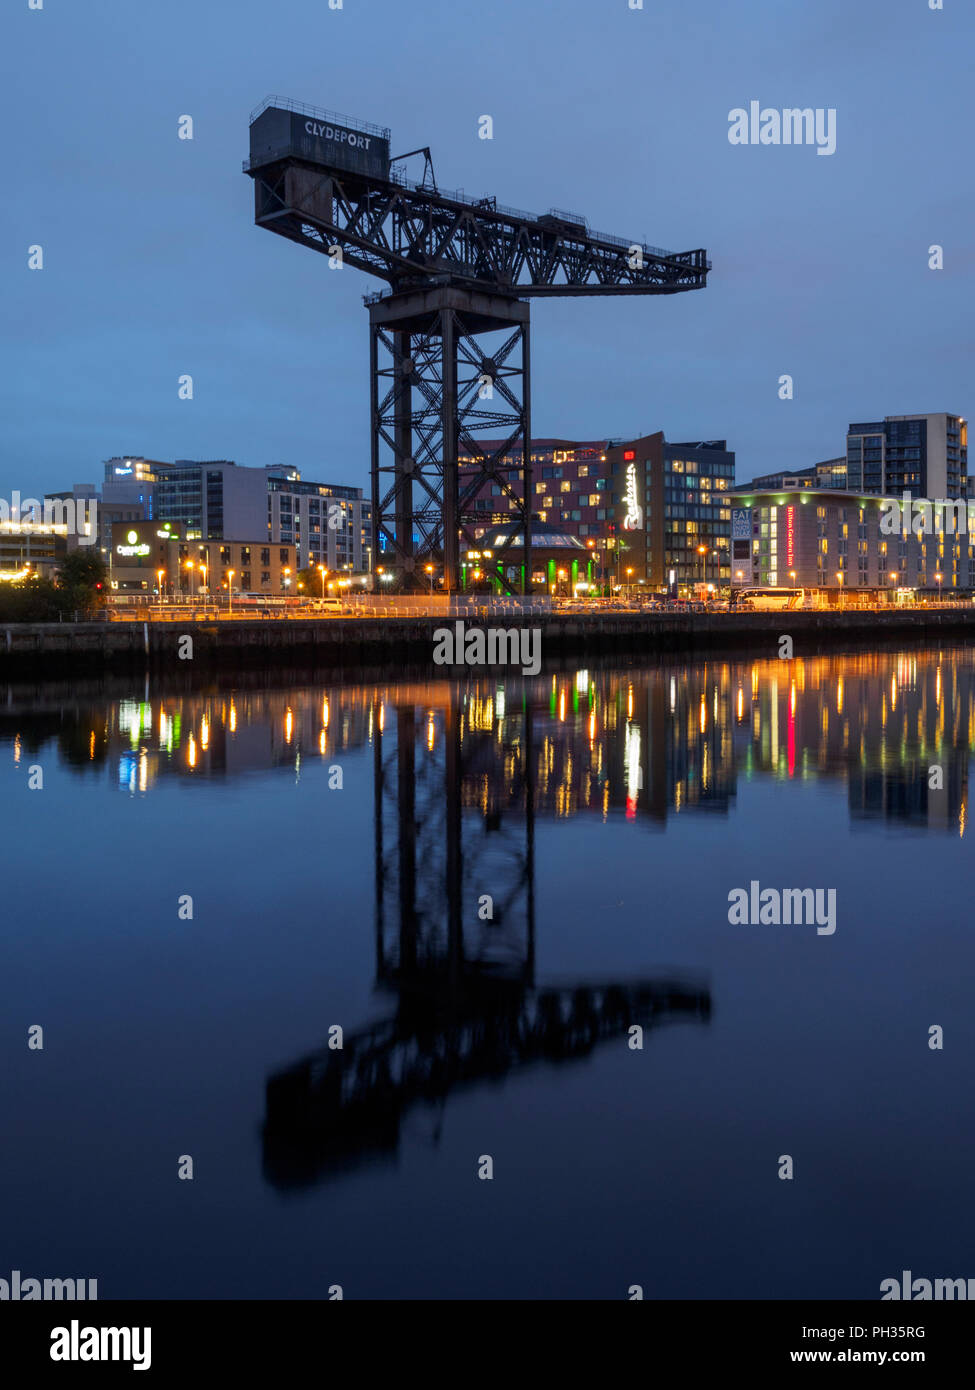 Crane on the River Clyde, Glasgow Stock Photo